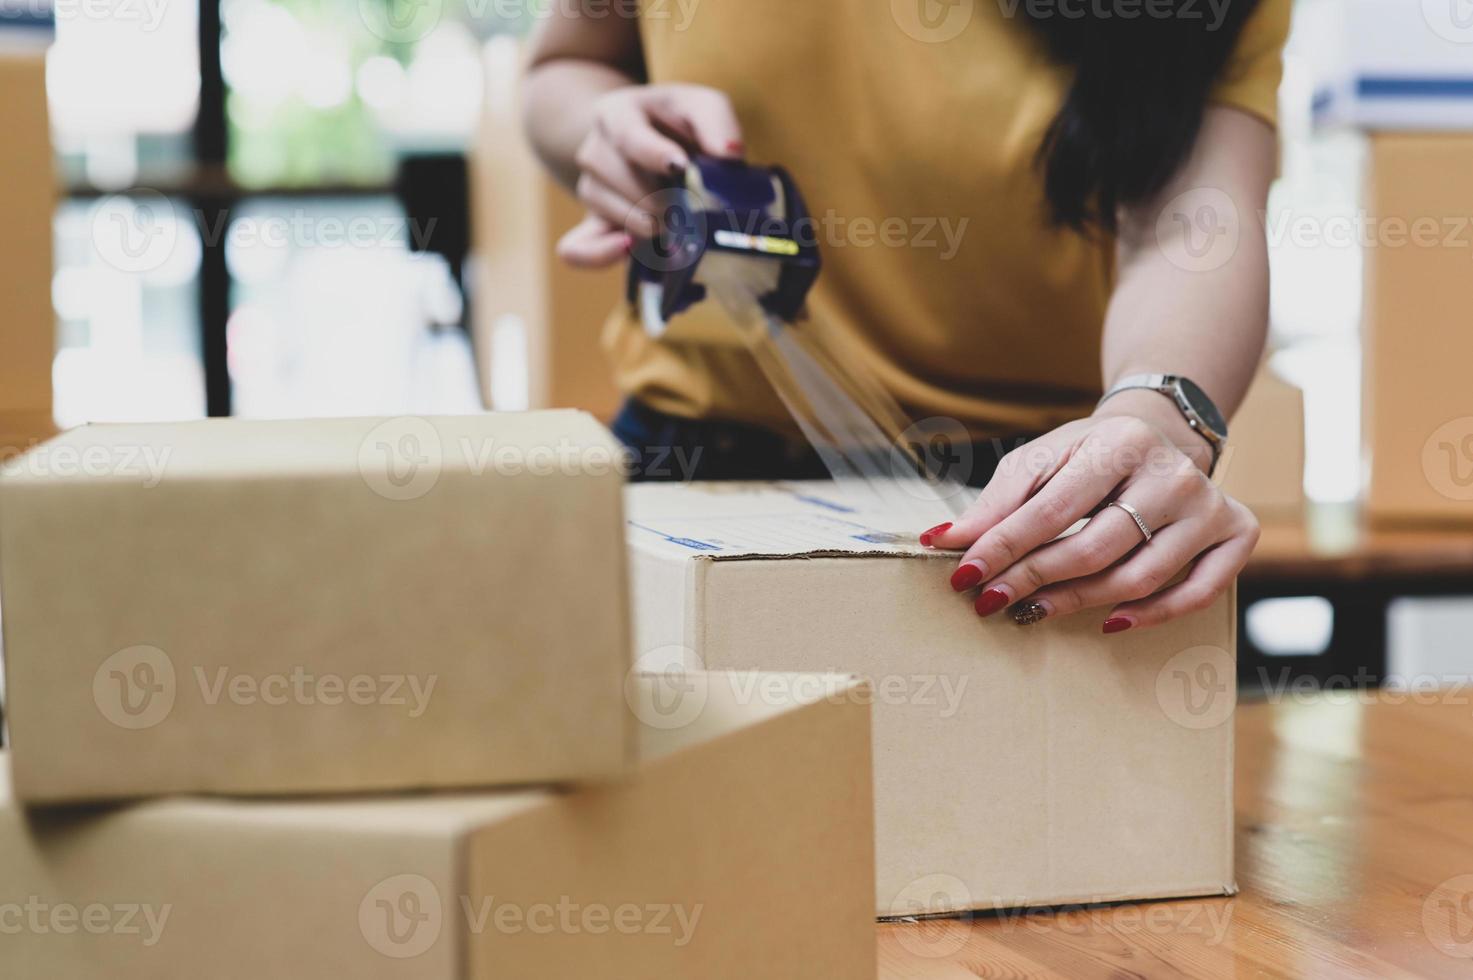 Parcel delivery workers are packing boxes, Tansporting. photo